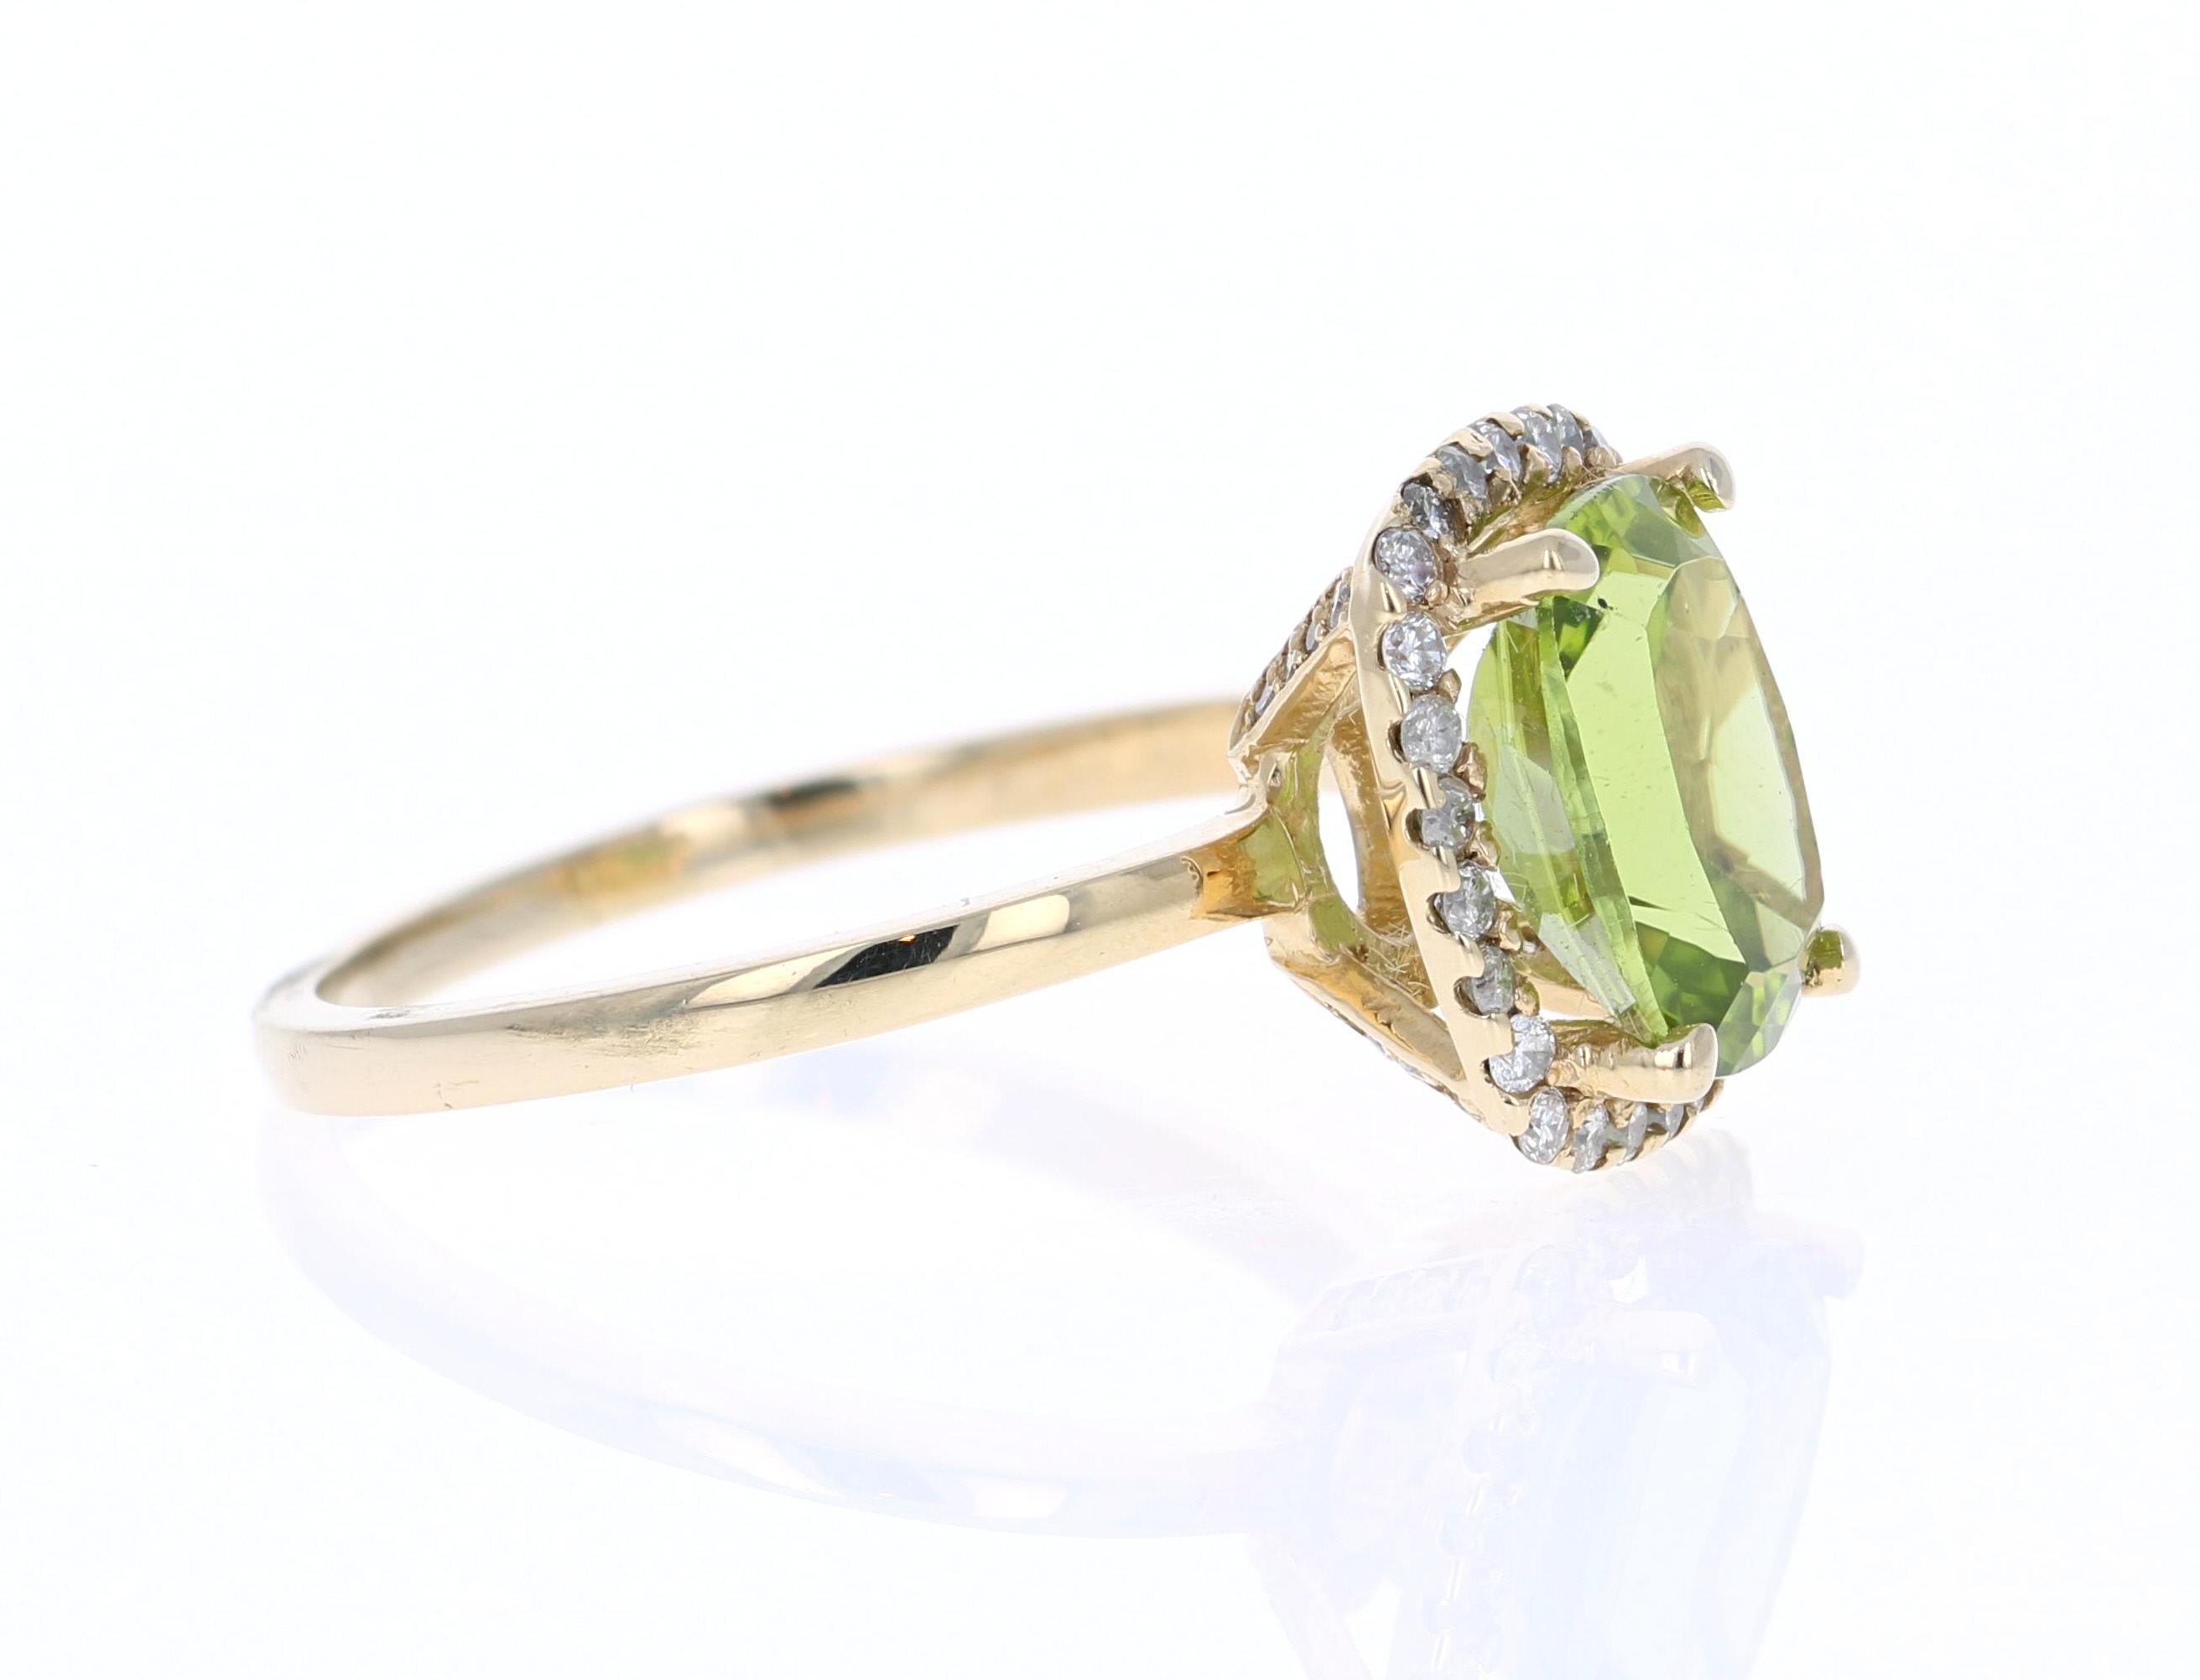 This beautiful ring has a Peridot in the center that weighs 2.97 Carats. The ring is surrounded by a gorgeous halo of 42 Round Cut Diamonds that weigh 0.34 carats. The total carat weight of the ring is 3.31 carats. 

The setting is crafted in 14K